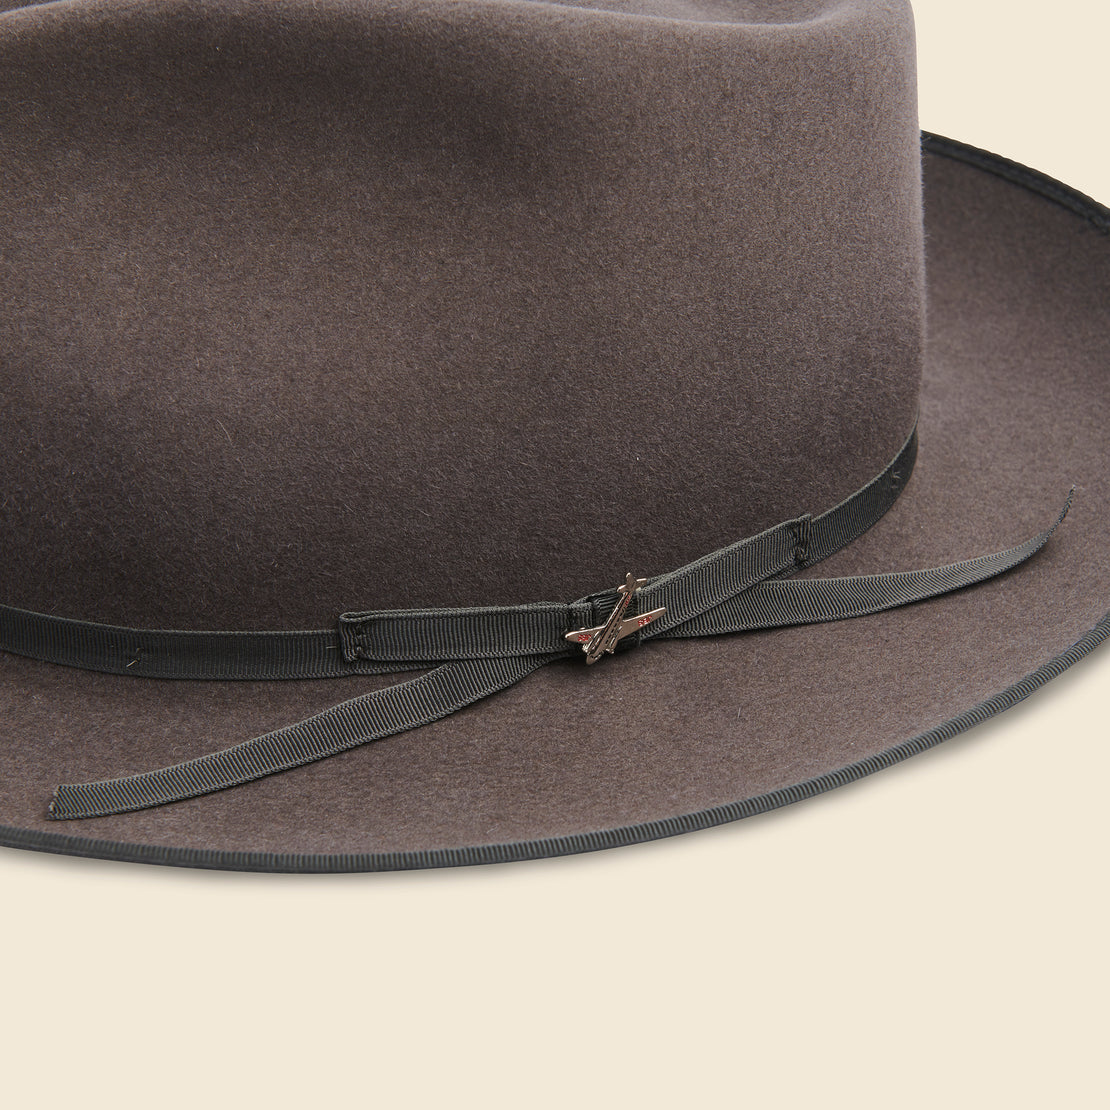 Stratoliner Hat - Caribou - Stetson - STAG Provisions - Accessories - Hats